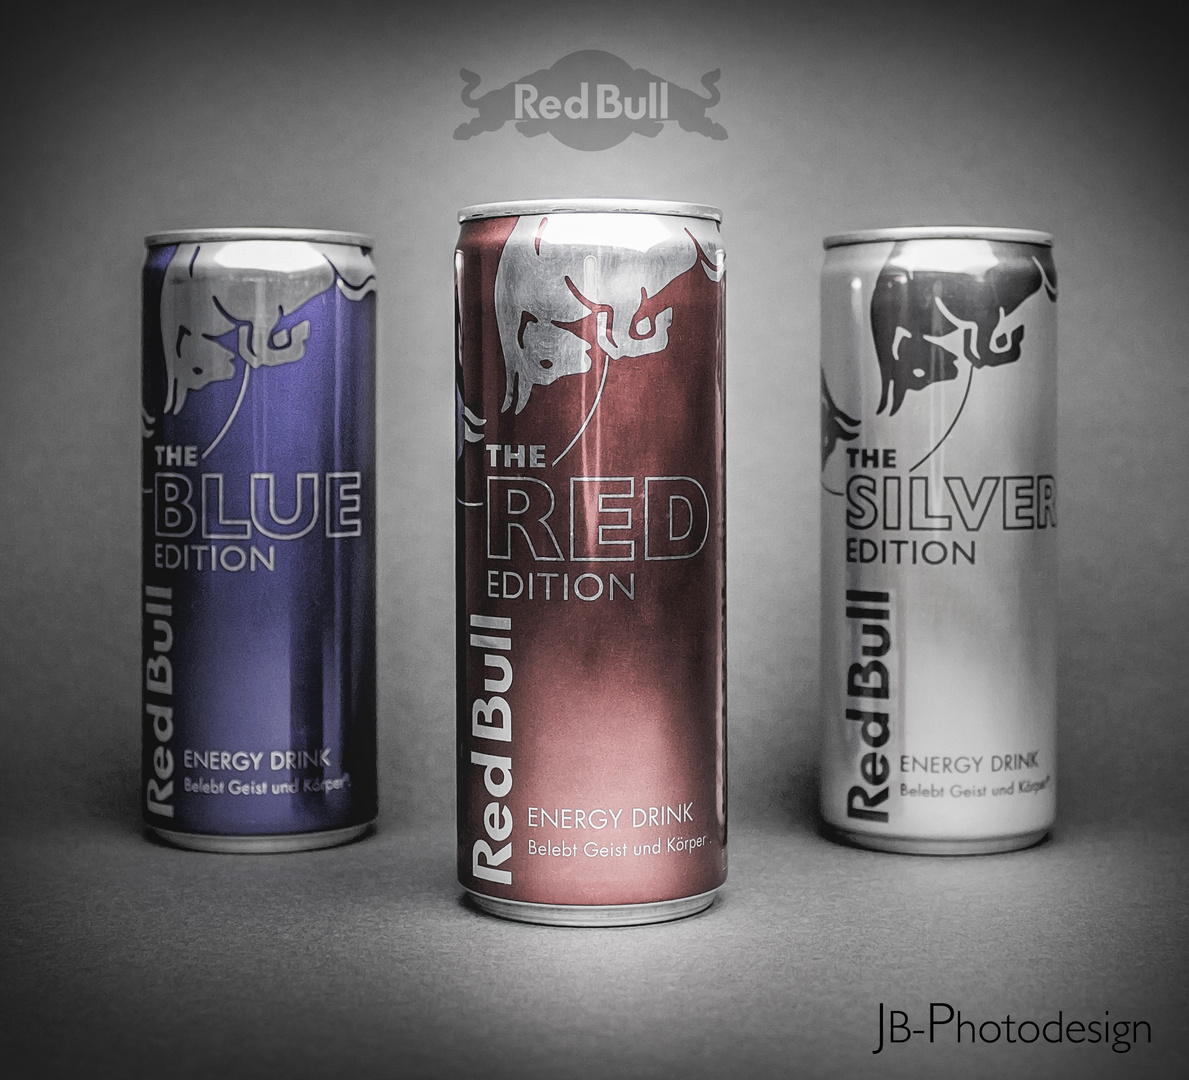 "The Red Bull Edition Family"